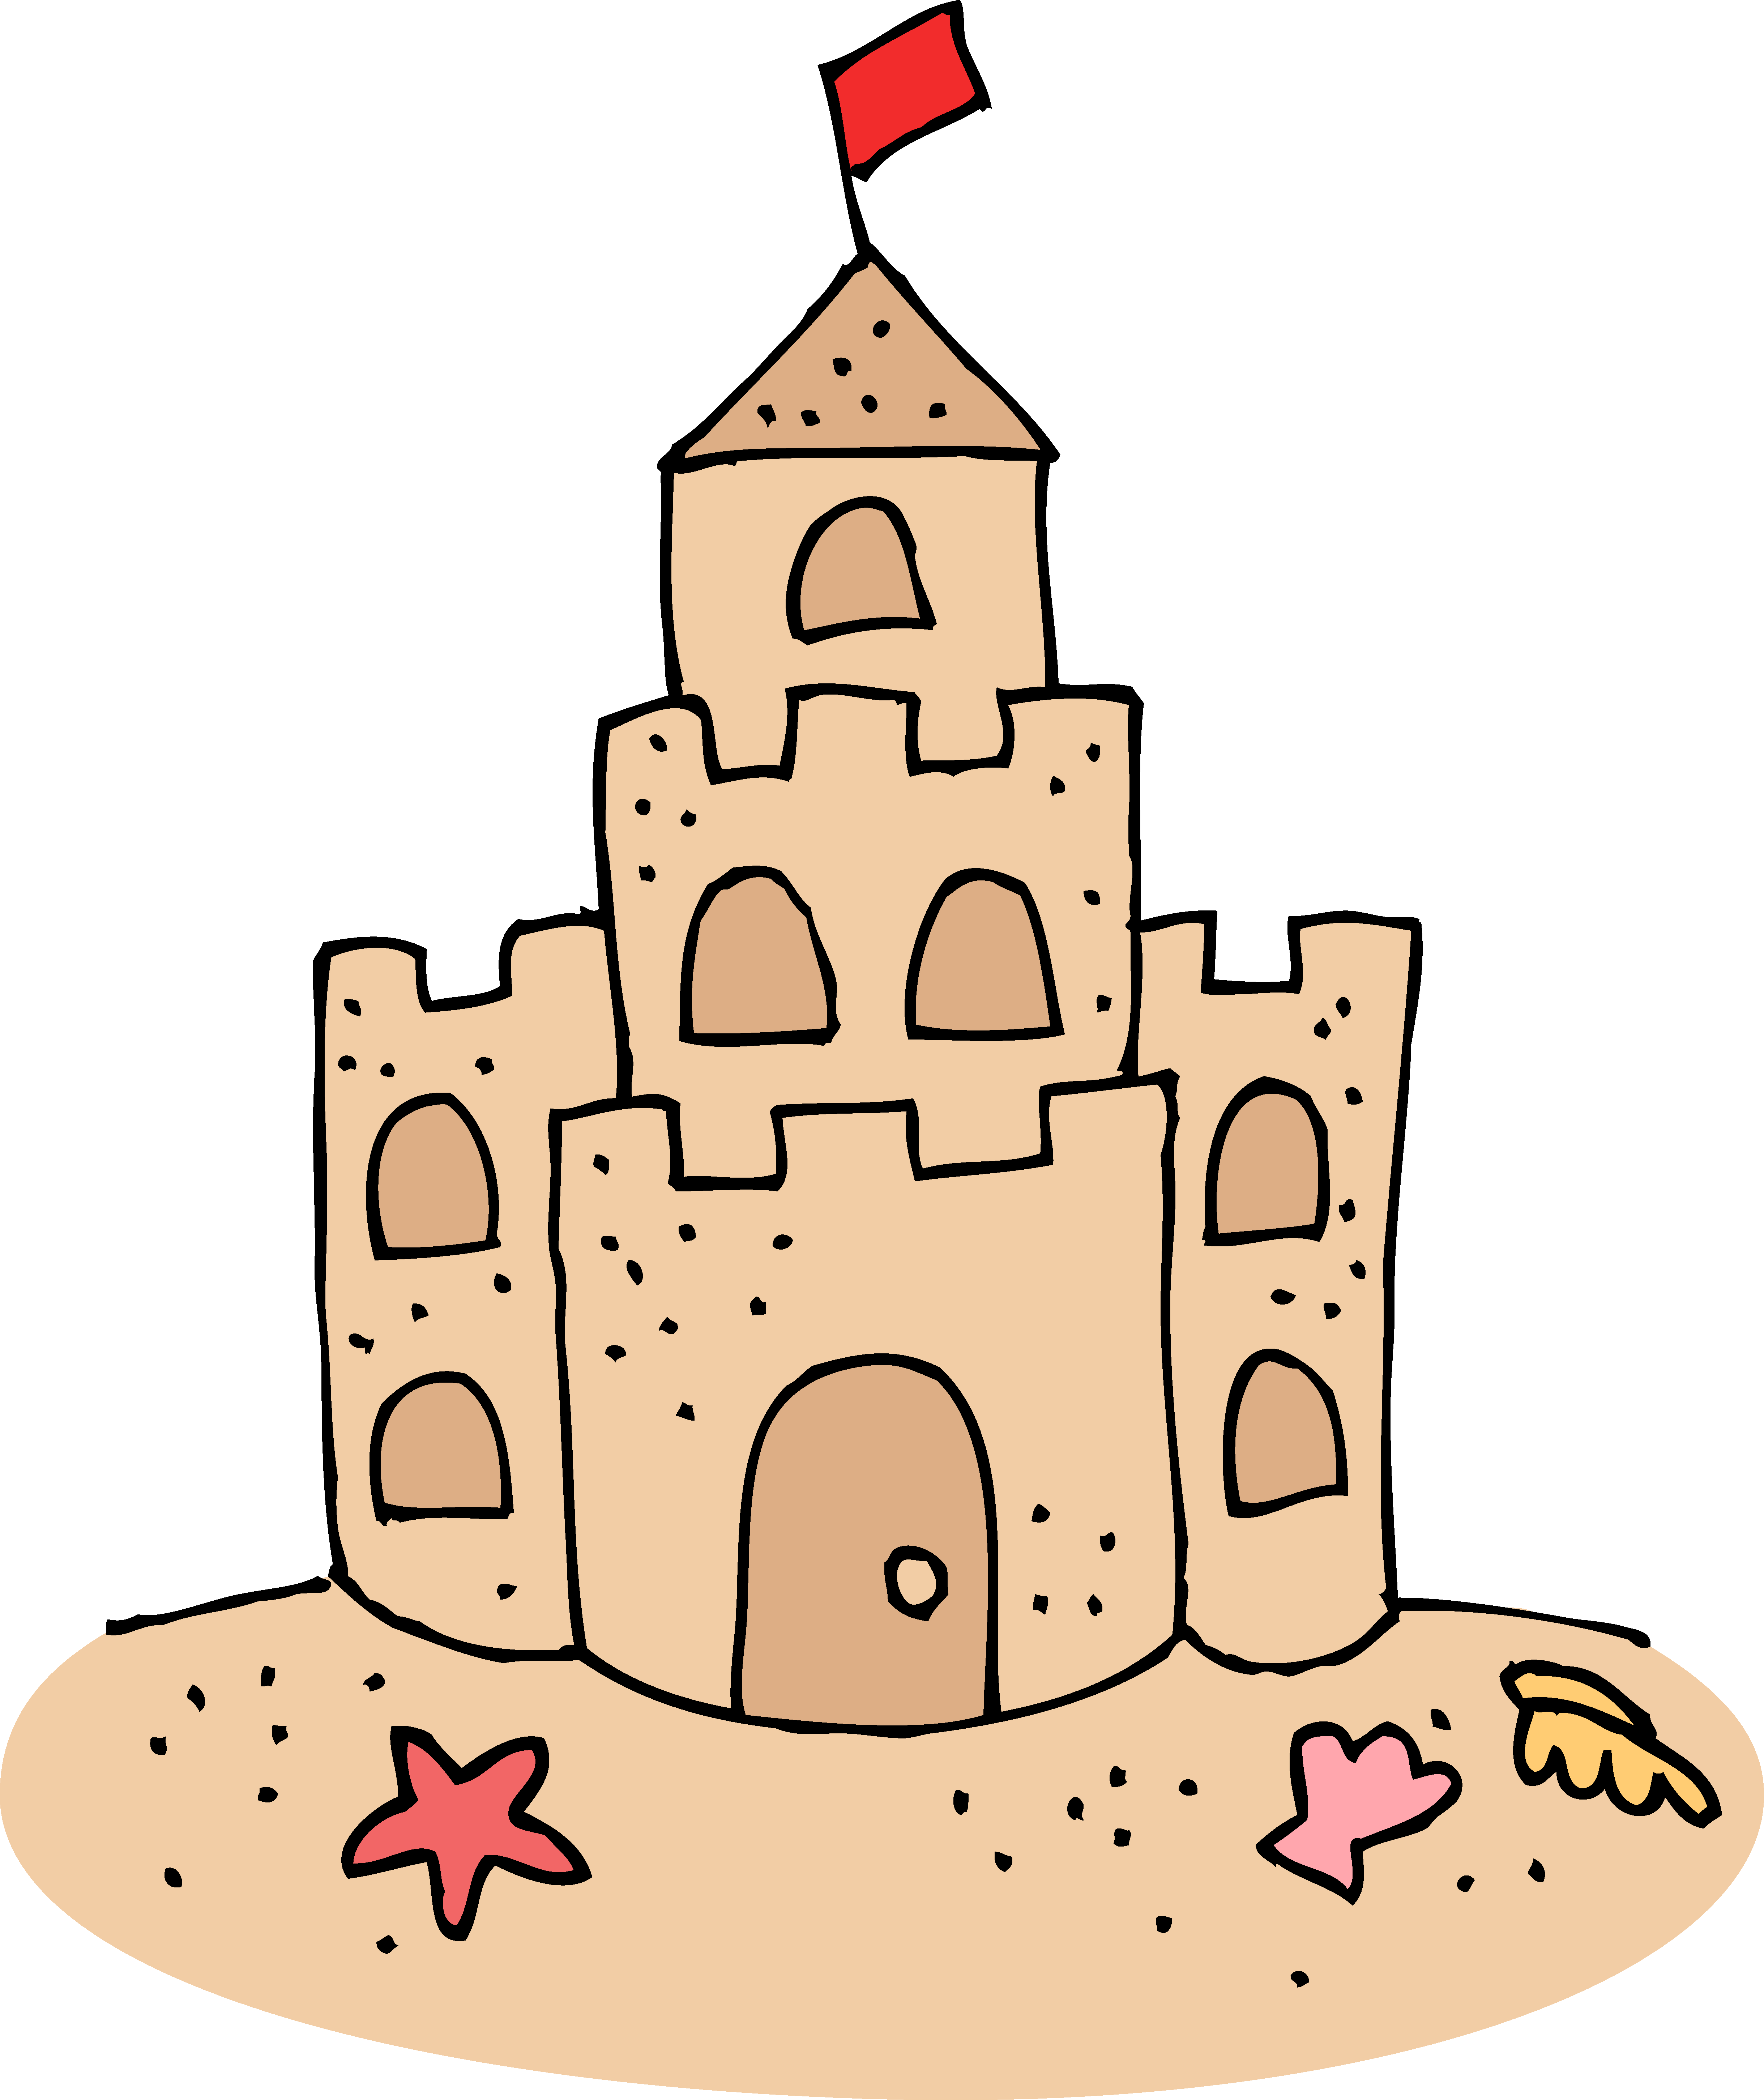 Clip Arts Related To : girl building sandcastle clipart. 